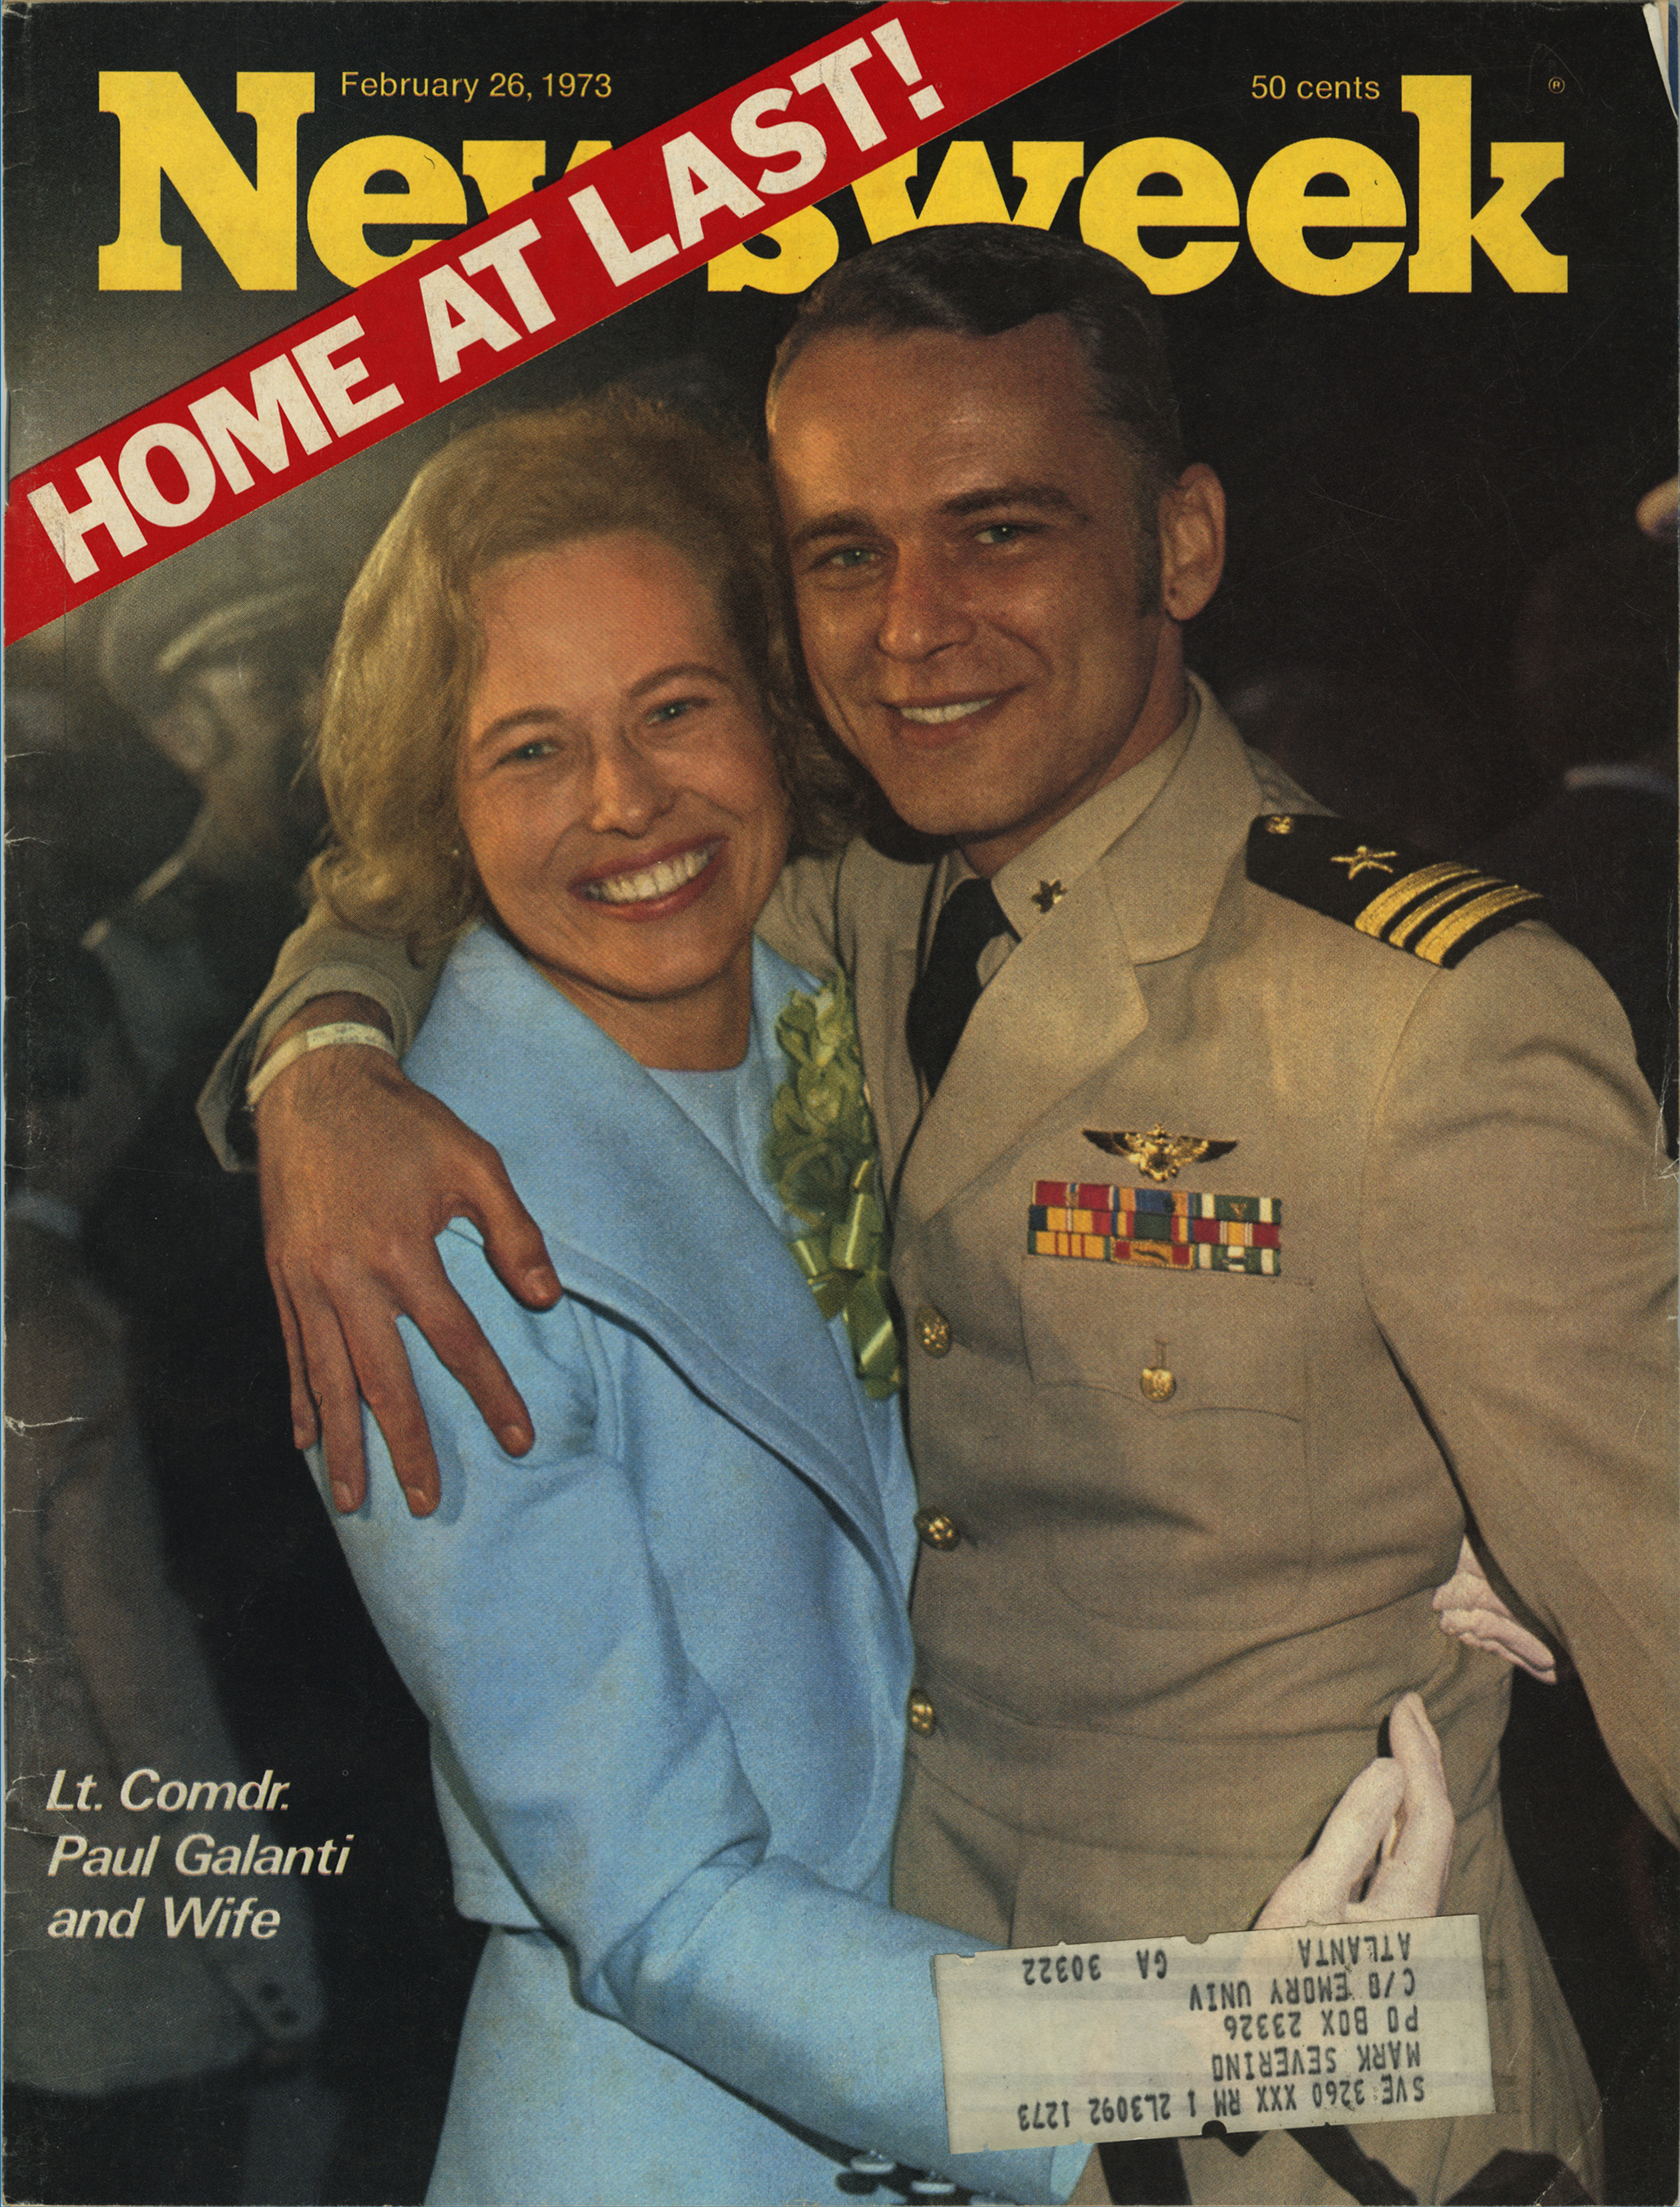 Newsweek issue from February 26, 1973, featuring Phyllis and Cmdr. Paul Galanti. Courtesy of the Galanti Family.